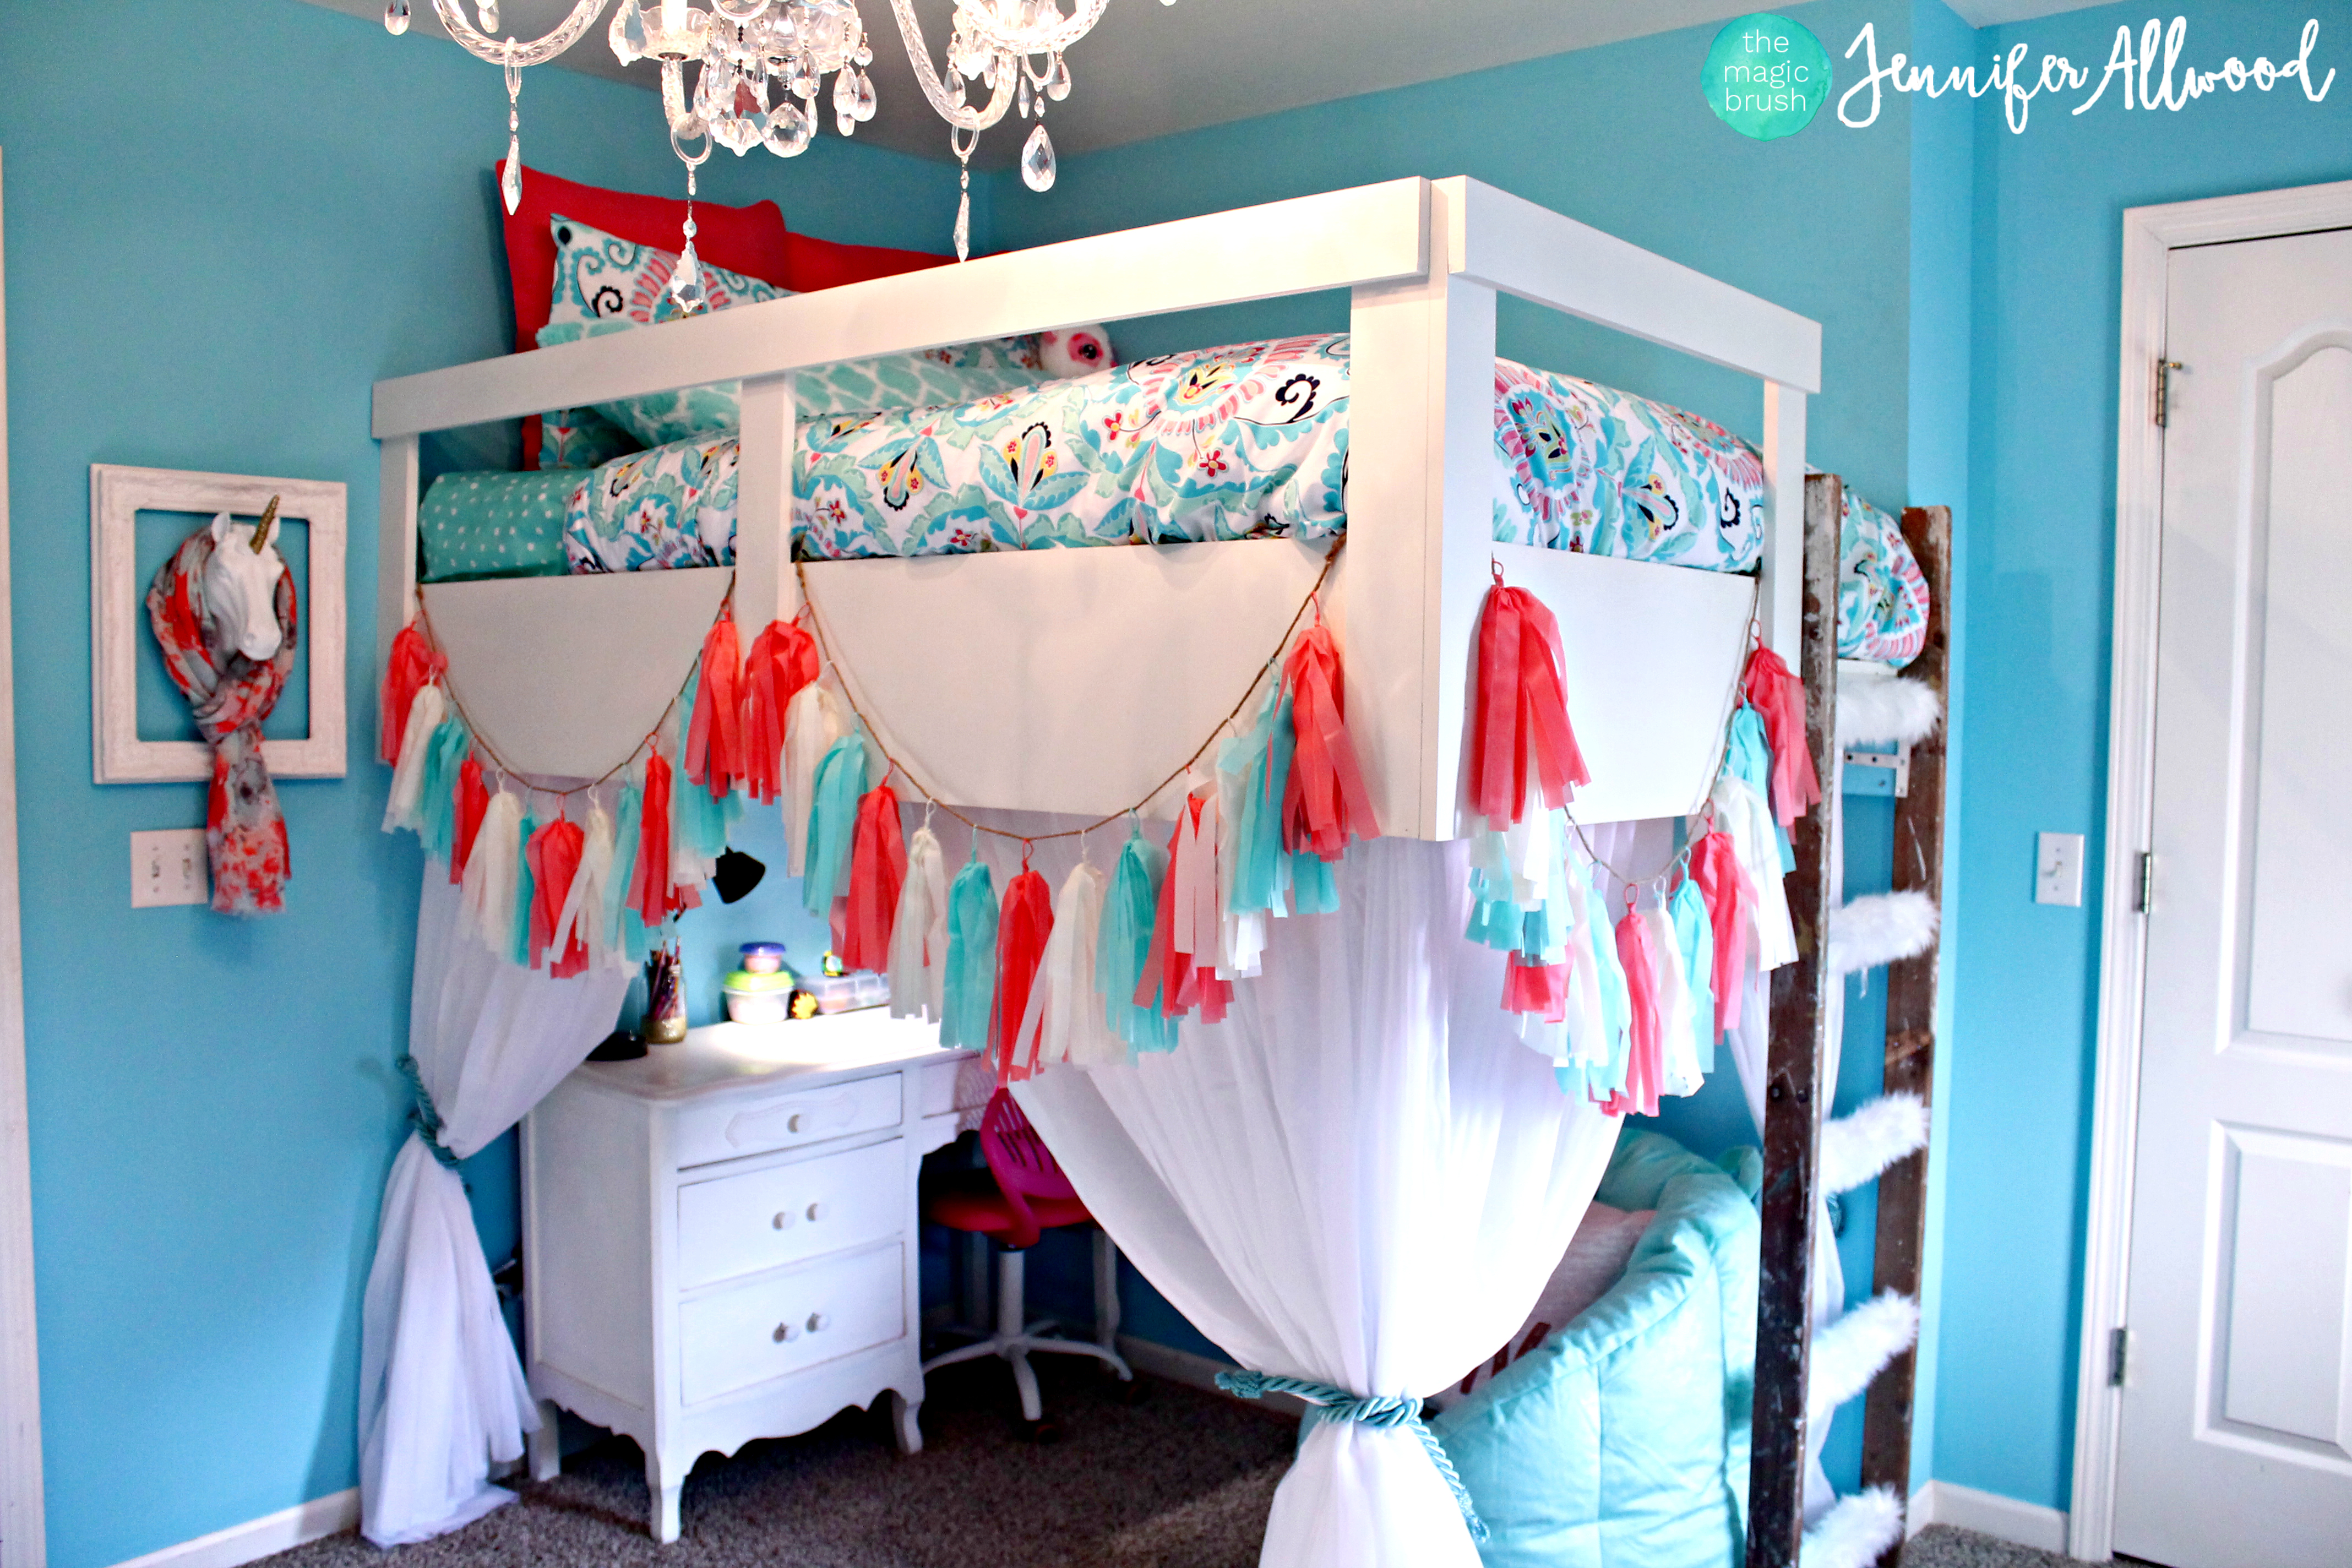 Ava’s new blue and blush bedroom + loft bed